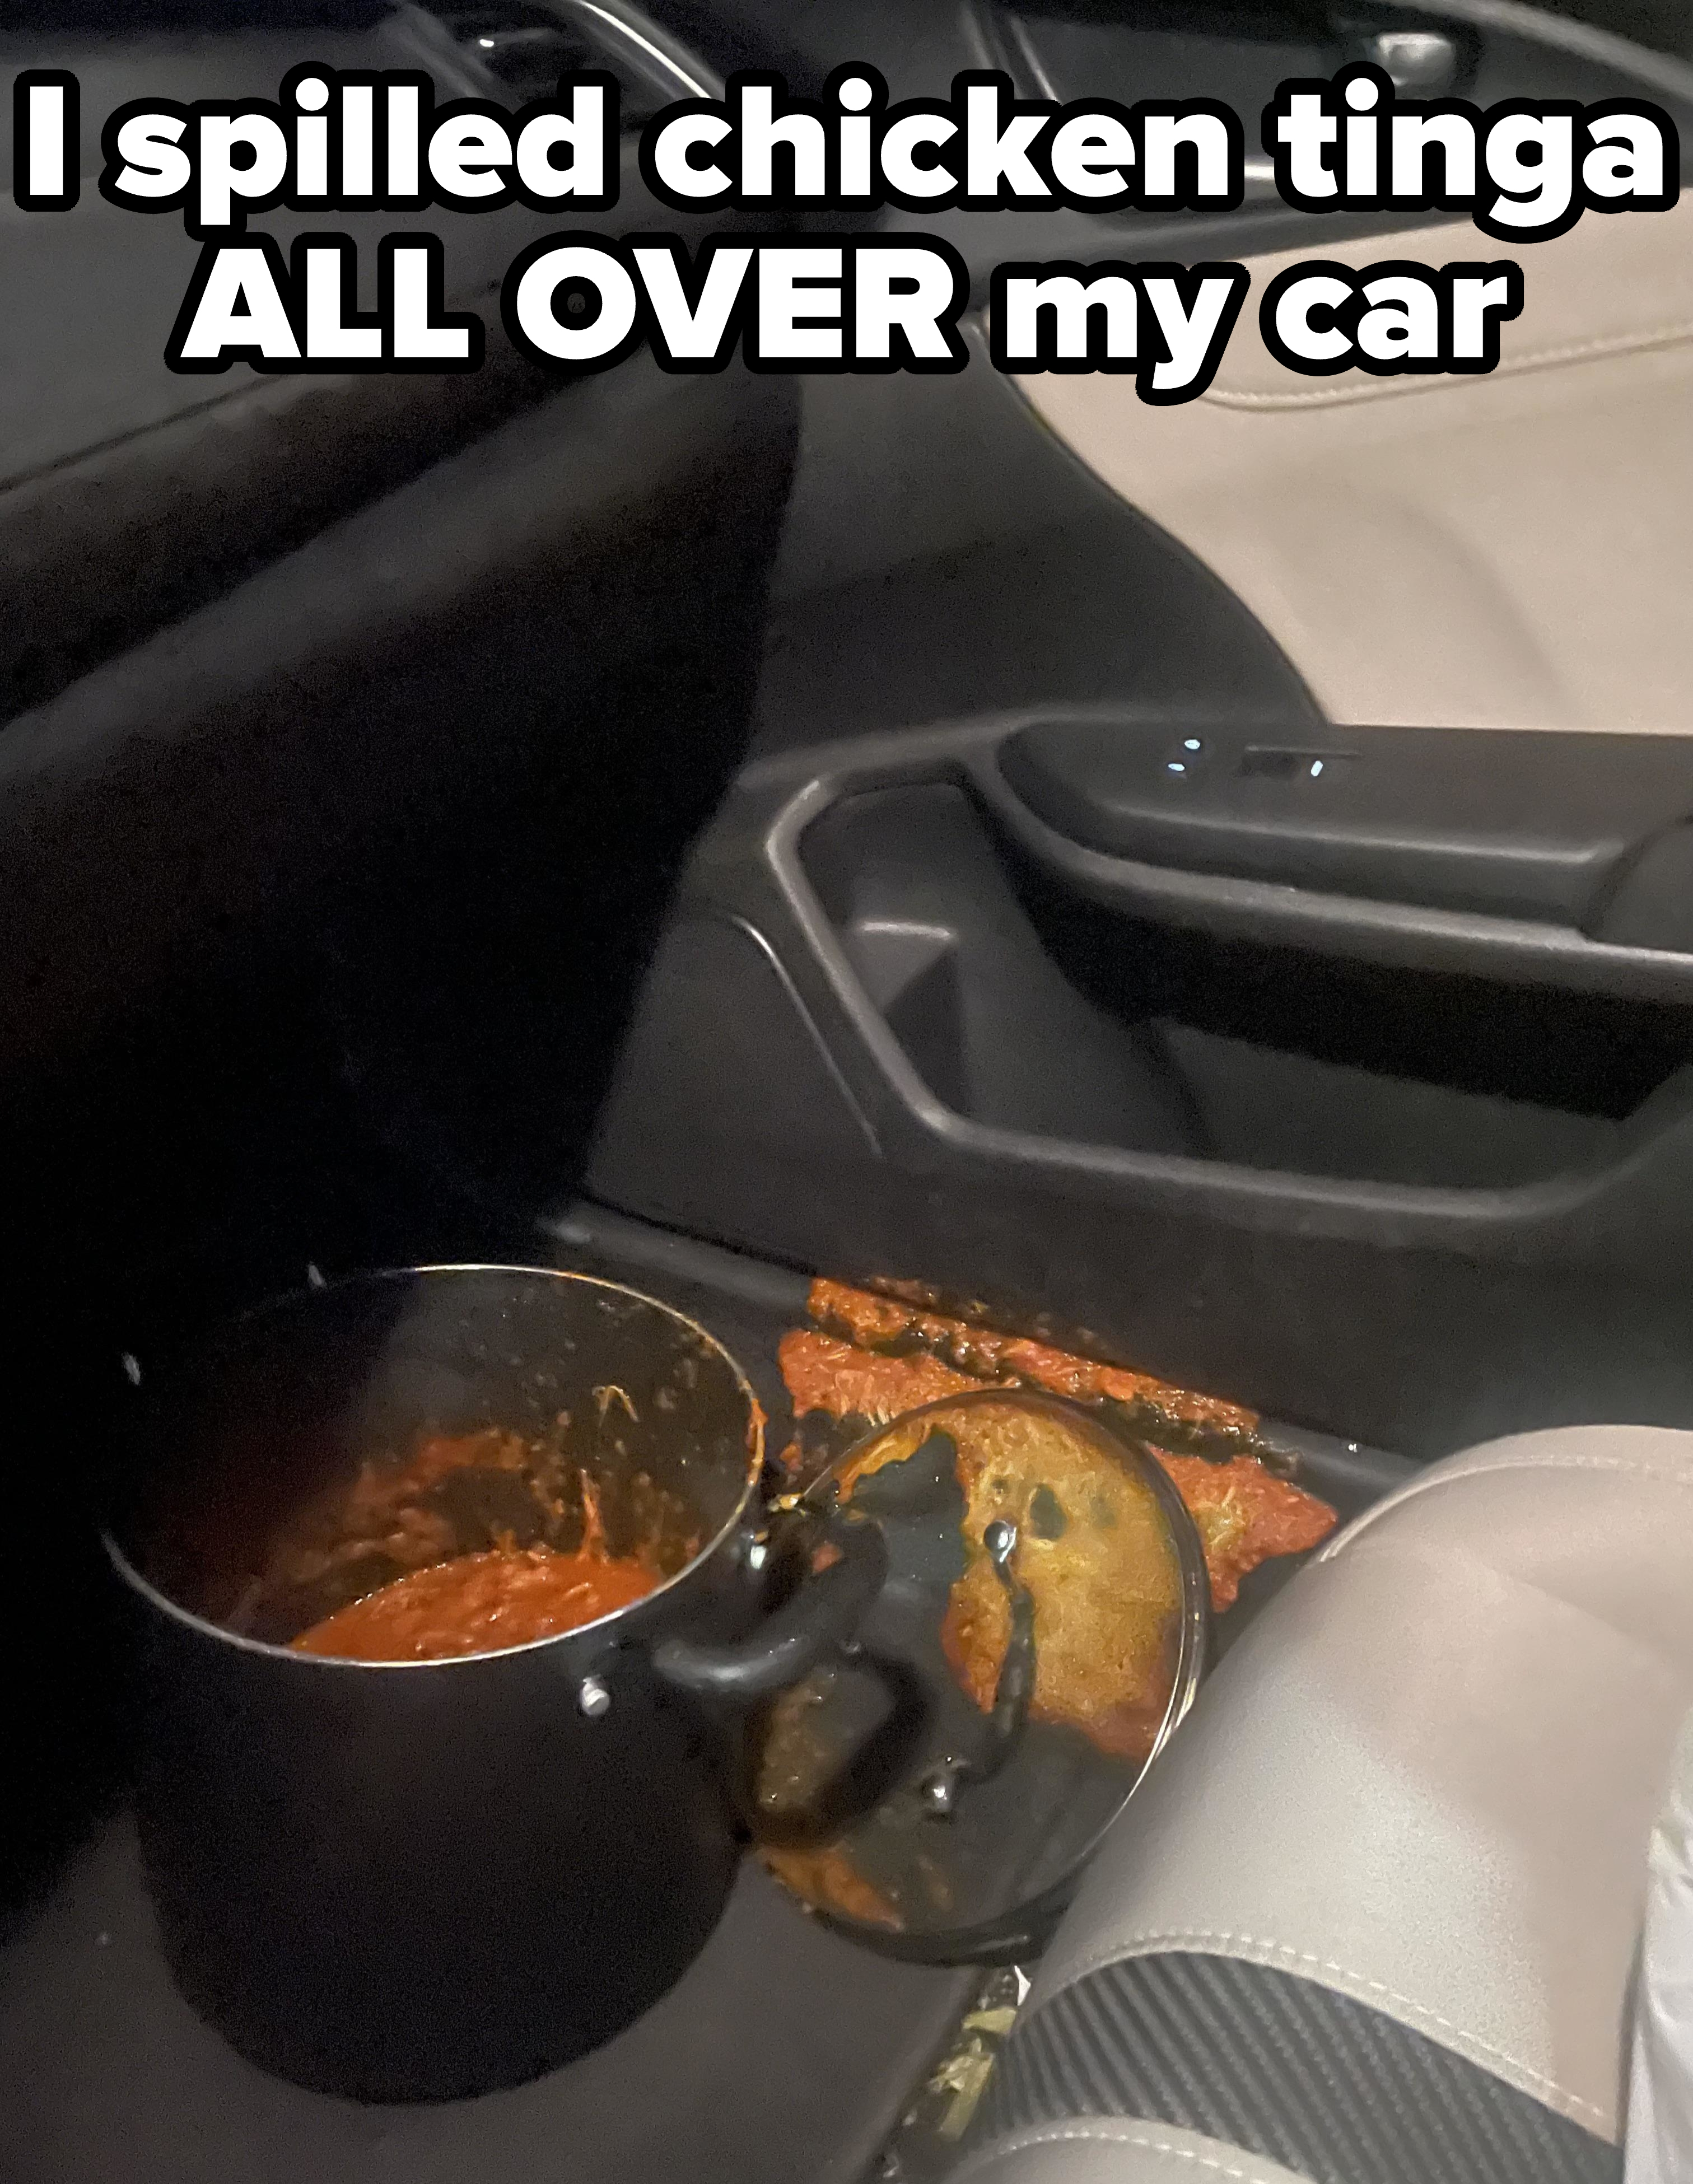 &quot;I spilled chicken tinga all over my car,&quot; with a deep pot of tinga, top off, and much of it on the car floor